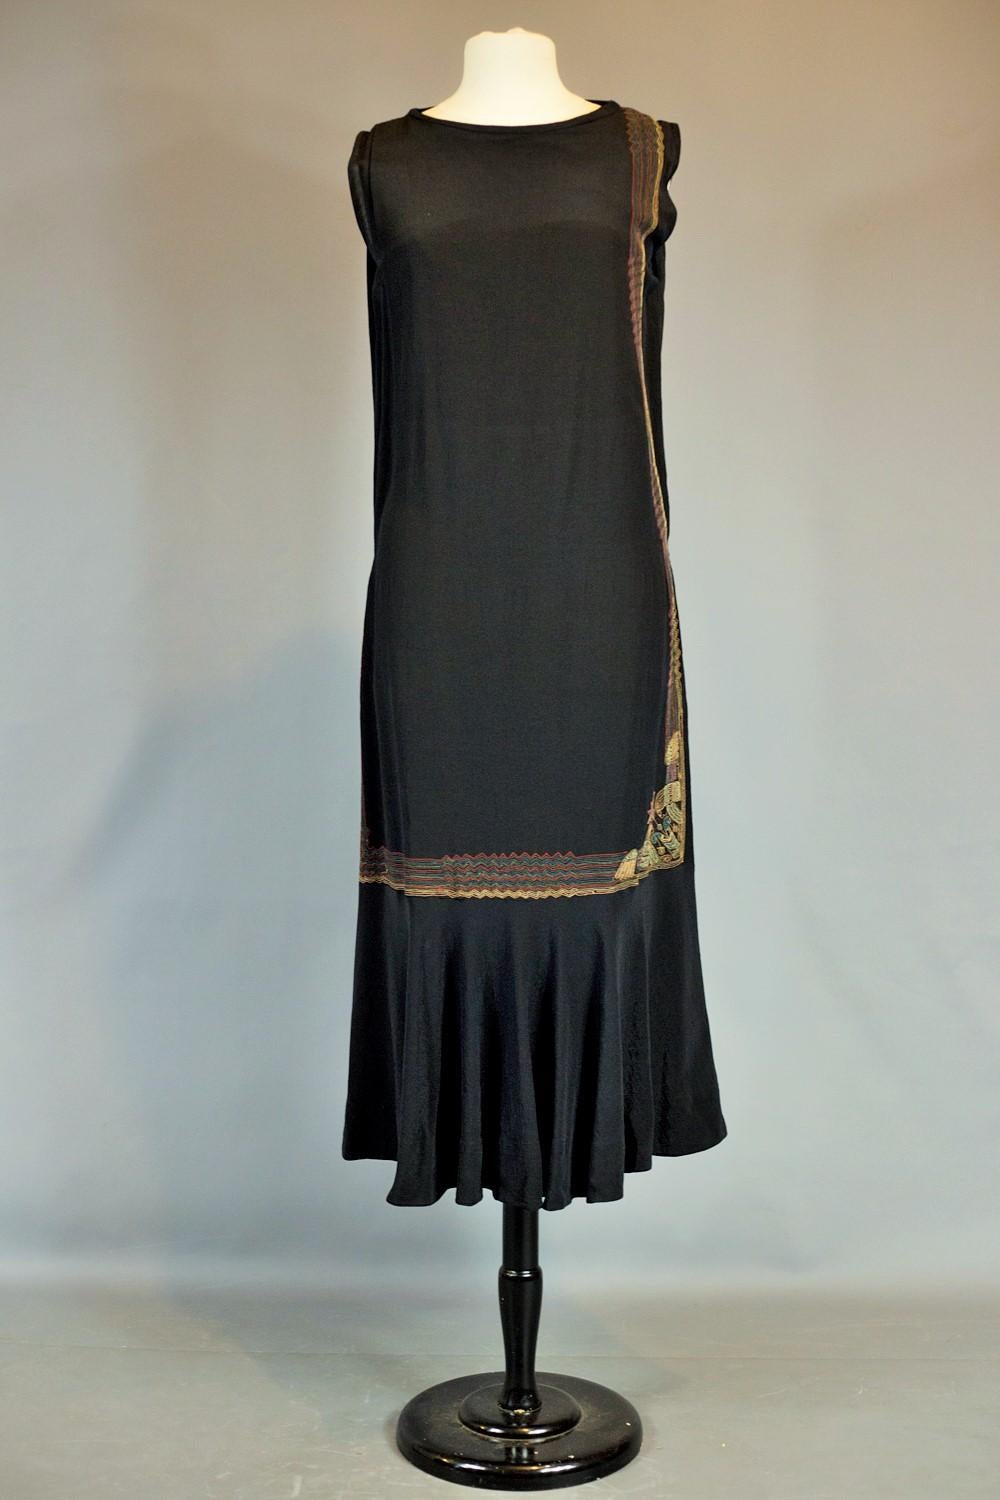 Circa 1930/1935
France or Europe

Ample dress in black ottoman silk crepe embroidered with polychrome zig-zag in Egyptomania style from the 1930s. Sleeveless straight dress sewn at an angle with mechanical embroidery used by French haute couture